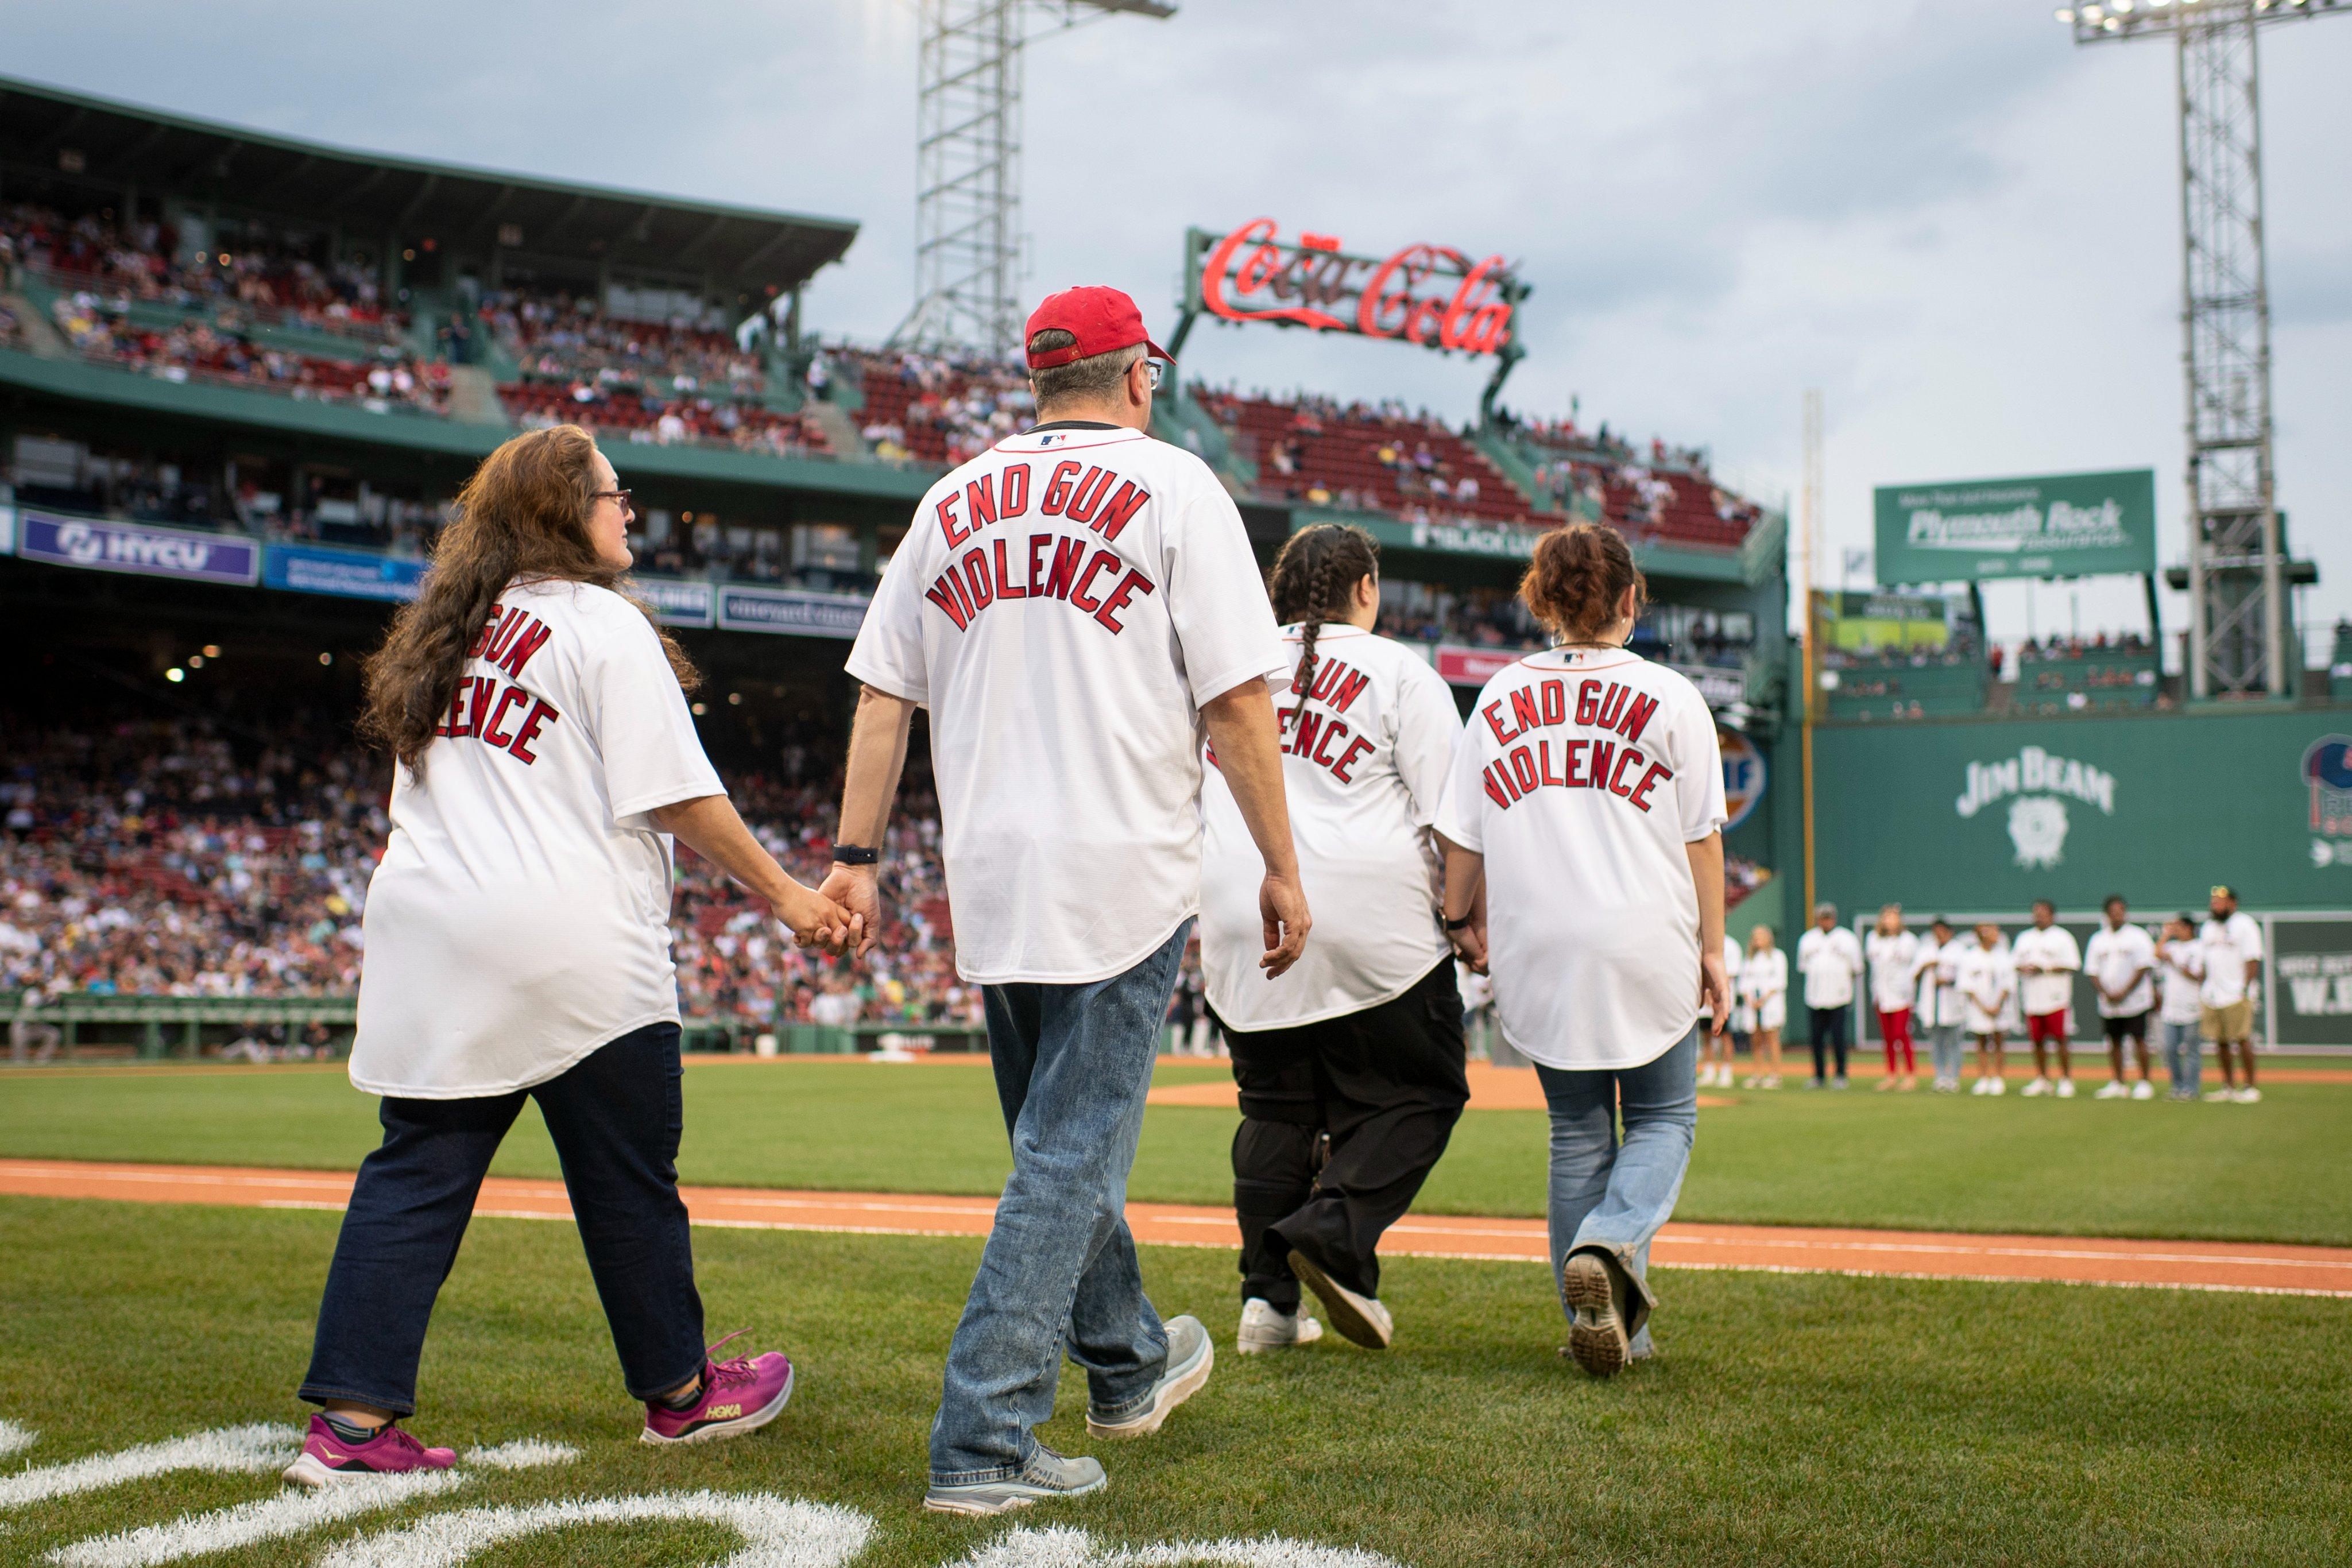 Red Sox on X: Tonight we welcomed a group of inspiring